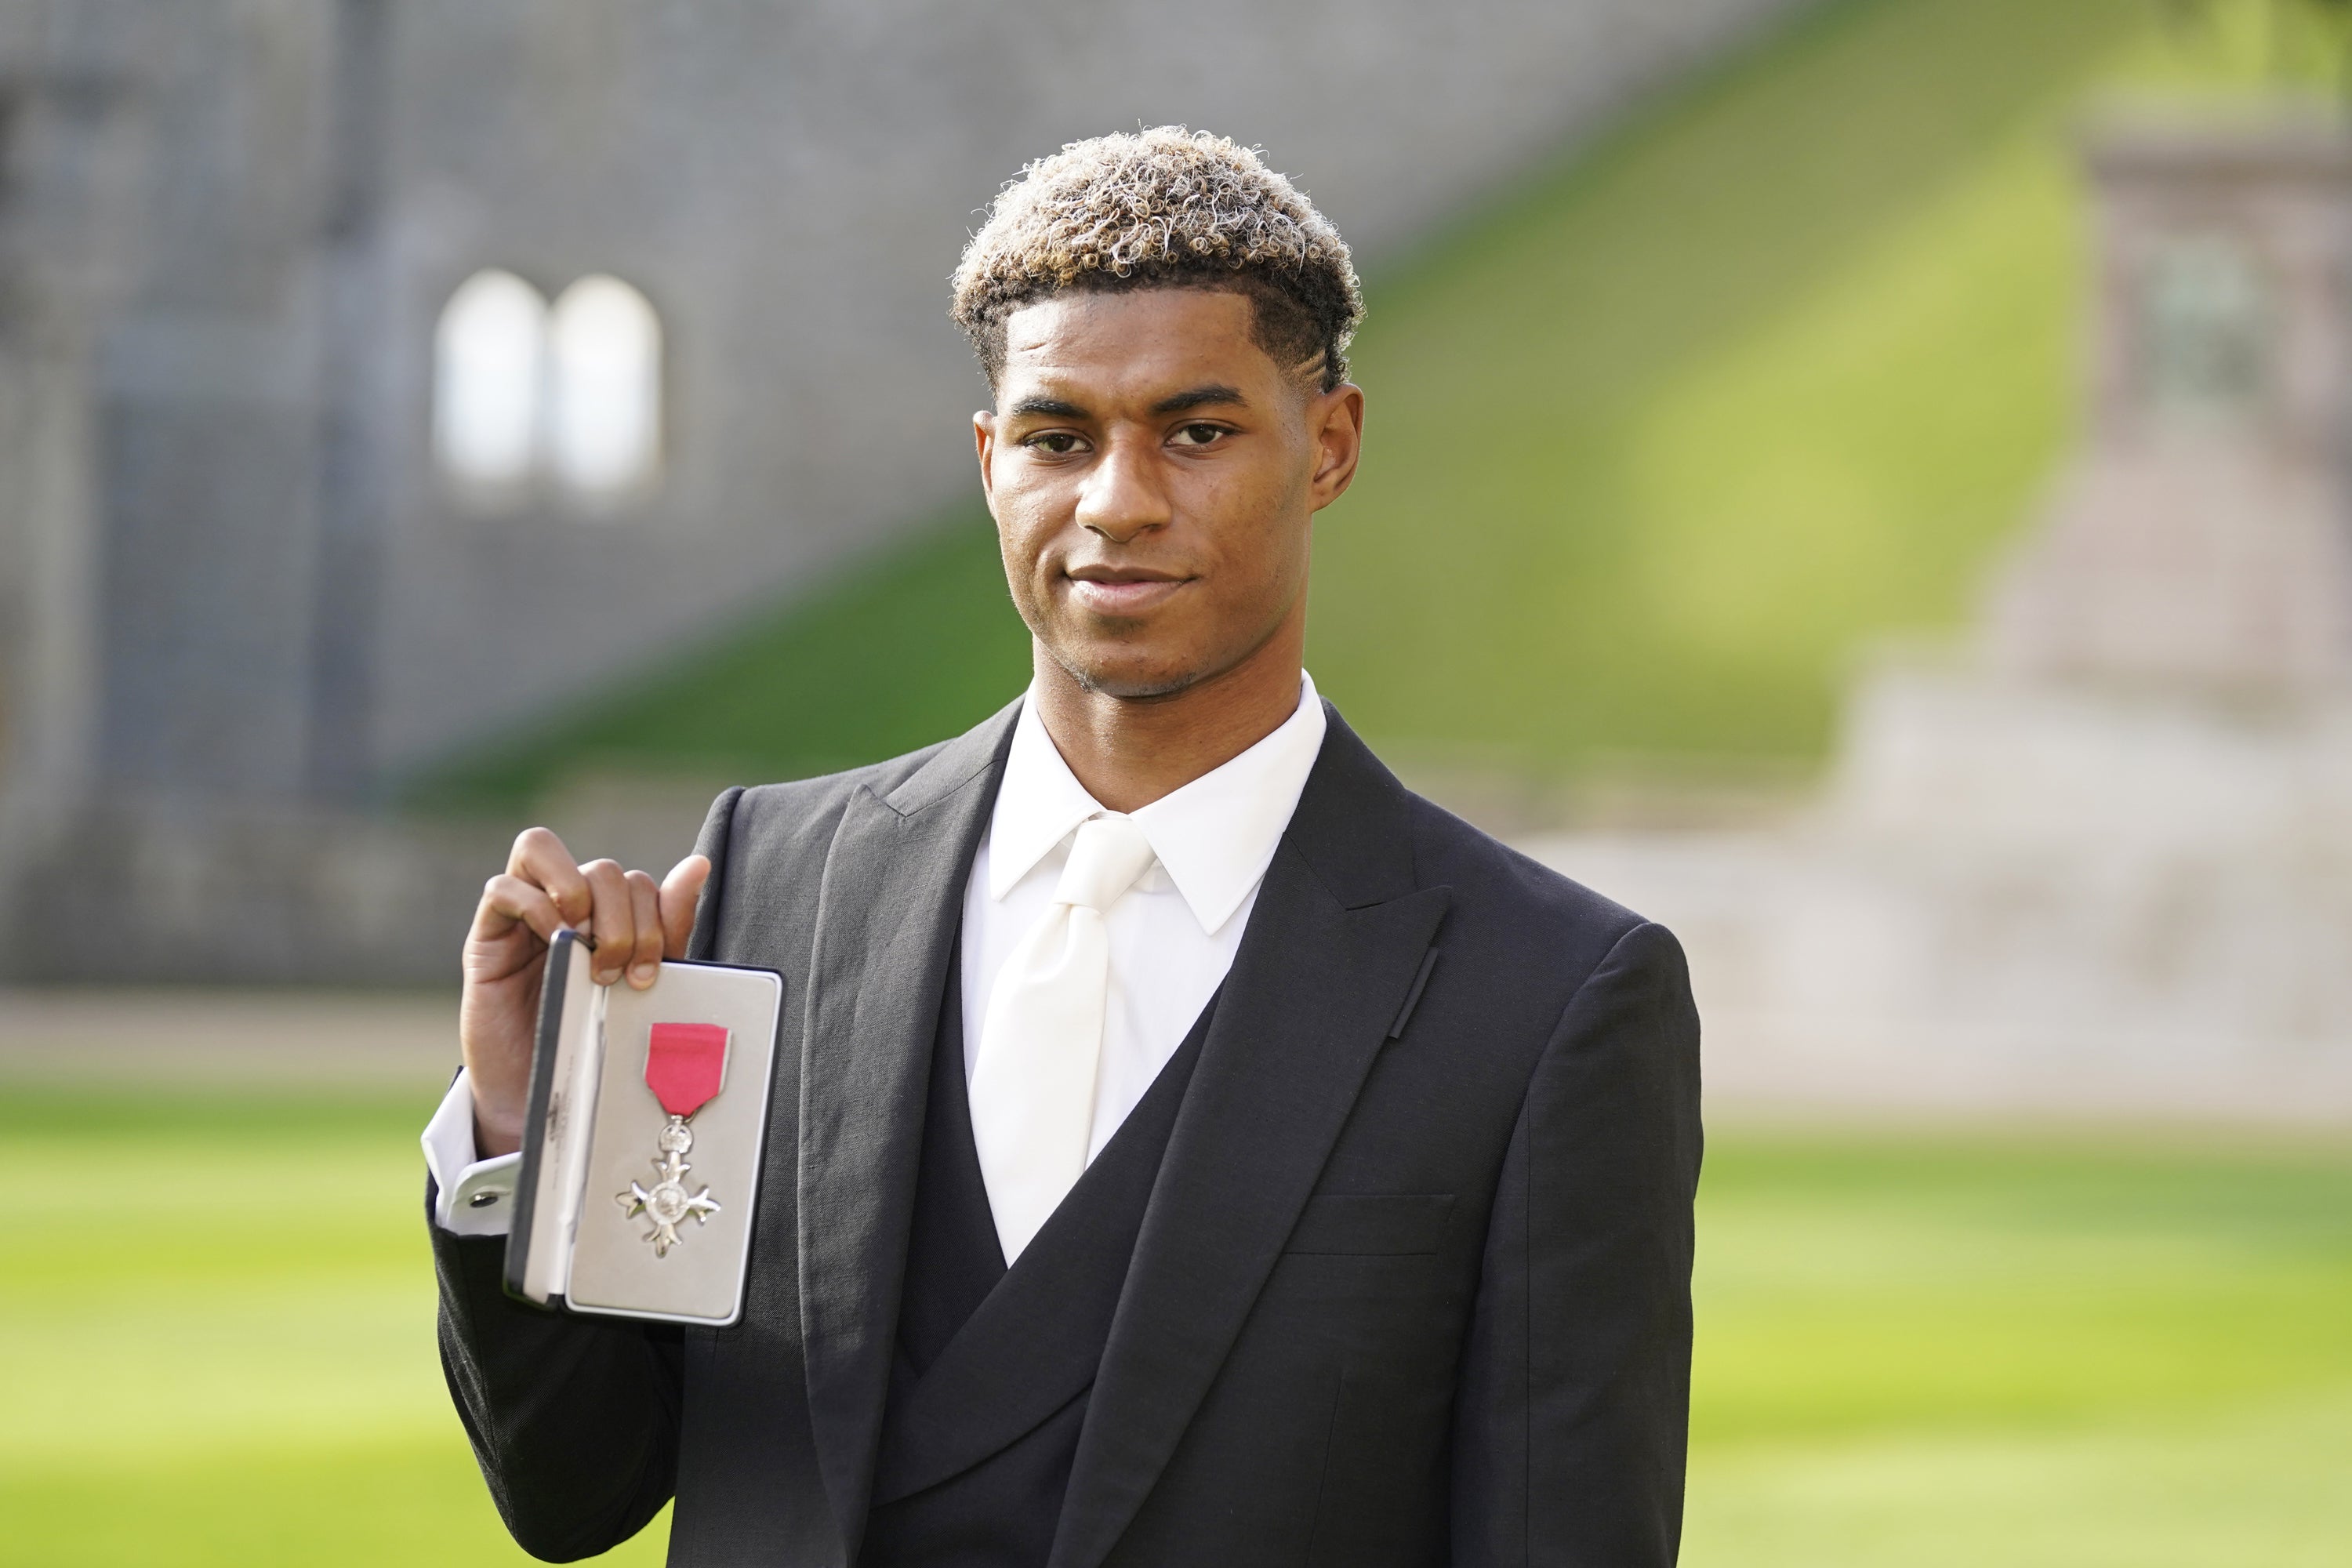 Marcus Rashford after receiving his MBE for services to vulnerable children in the UK (Andrew Matthews/PA)